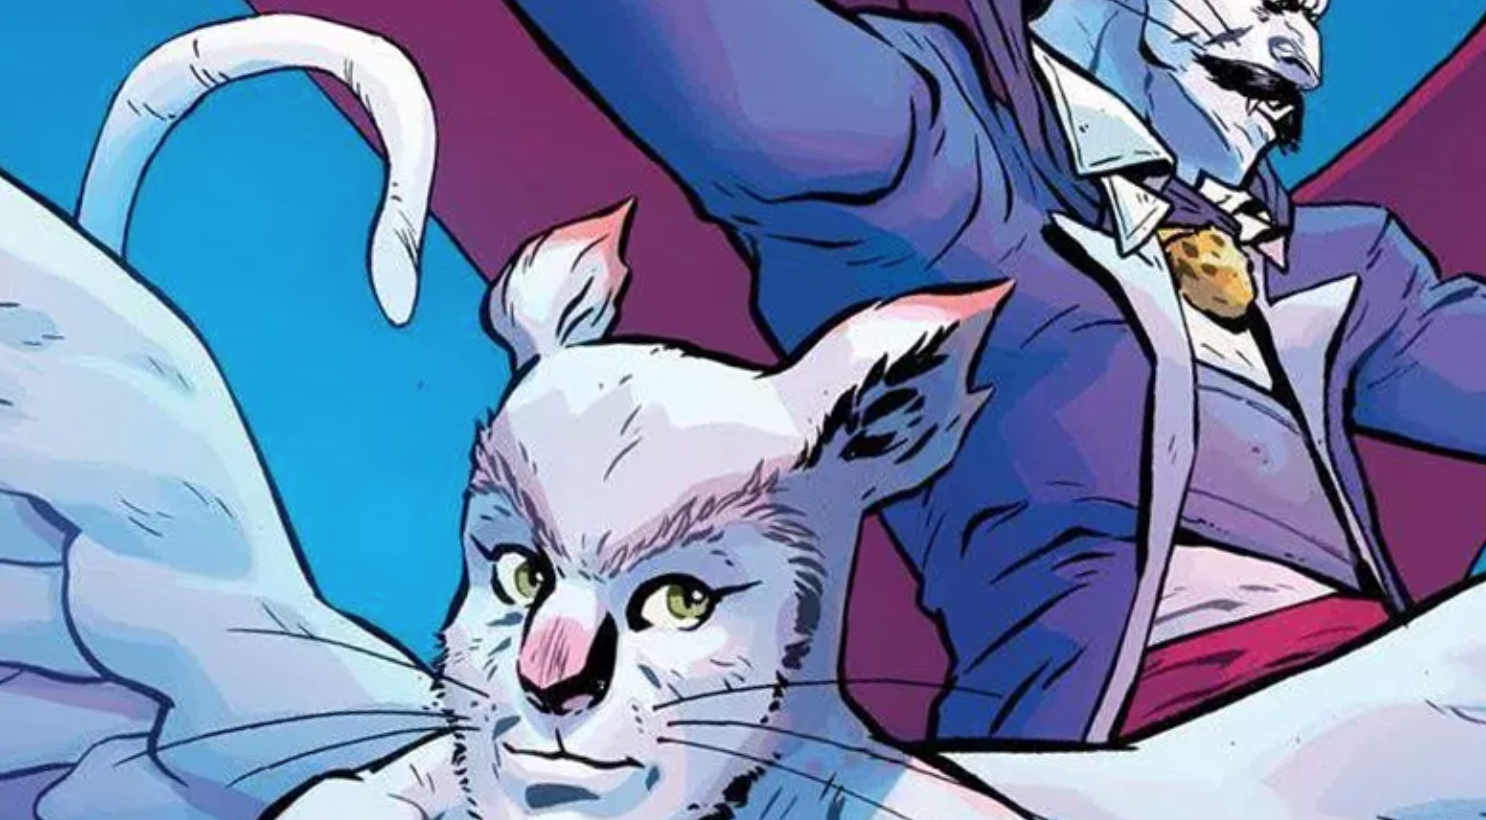 Margaret atwood’s feline adventure continues with ‘angel catbird’ volume 2